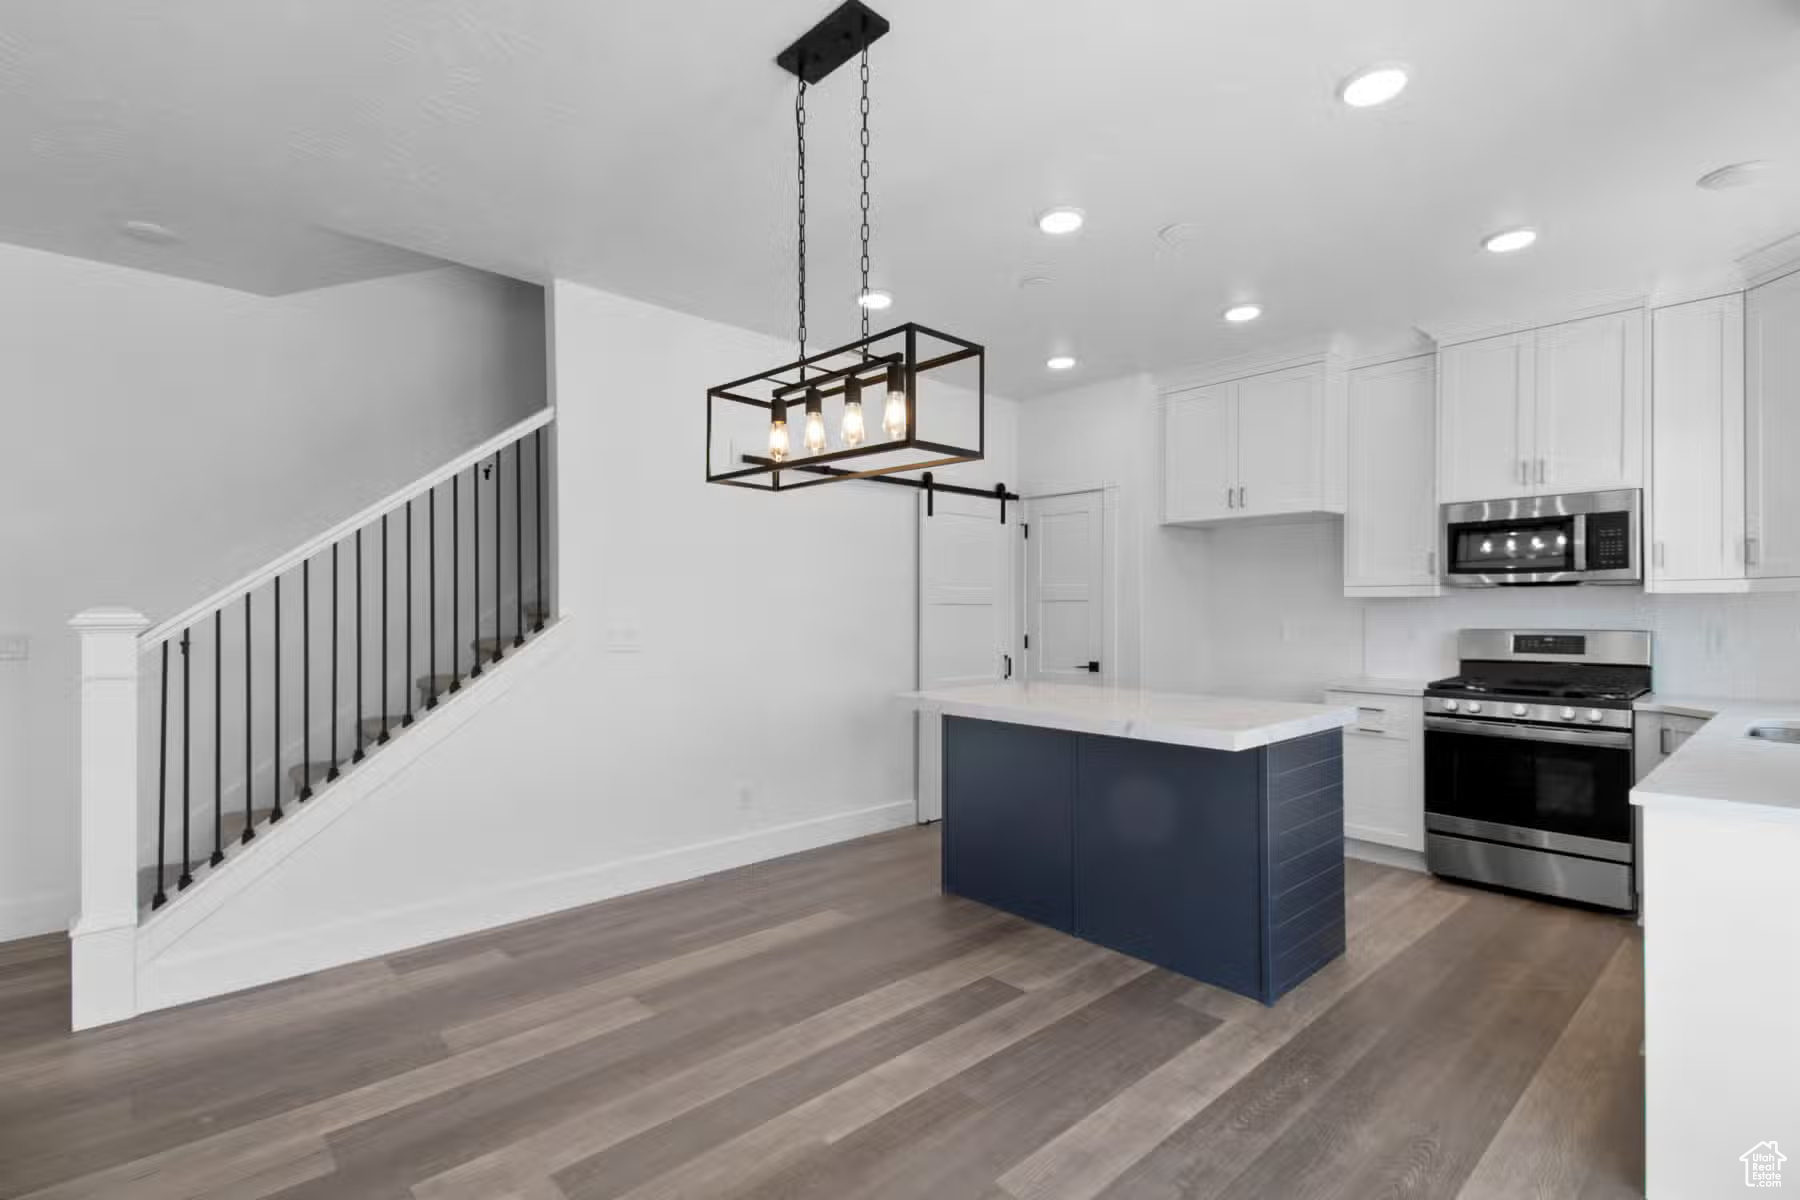 Kitchen featuring a kitchen island, appliances with stainless steel finishes, dark hardwood / wood-style flooring, and white cabinets